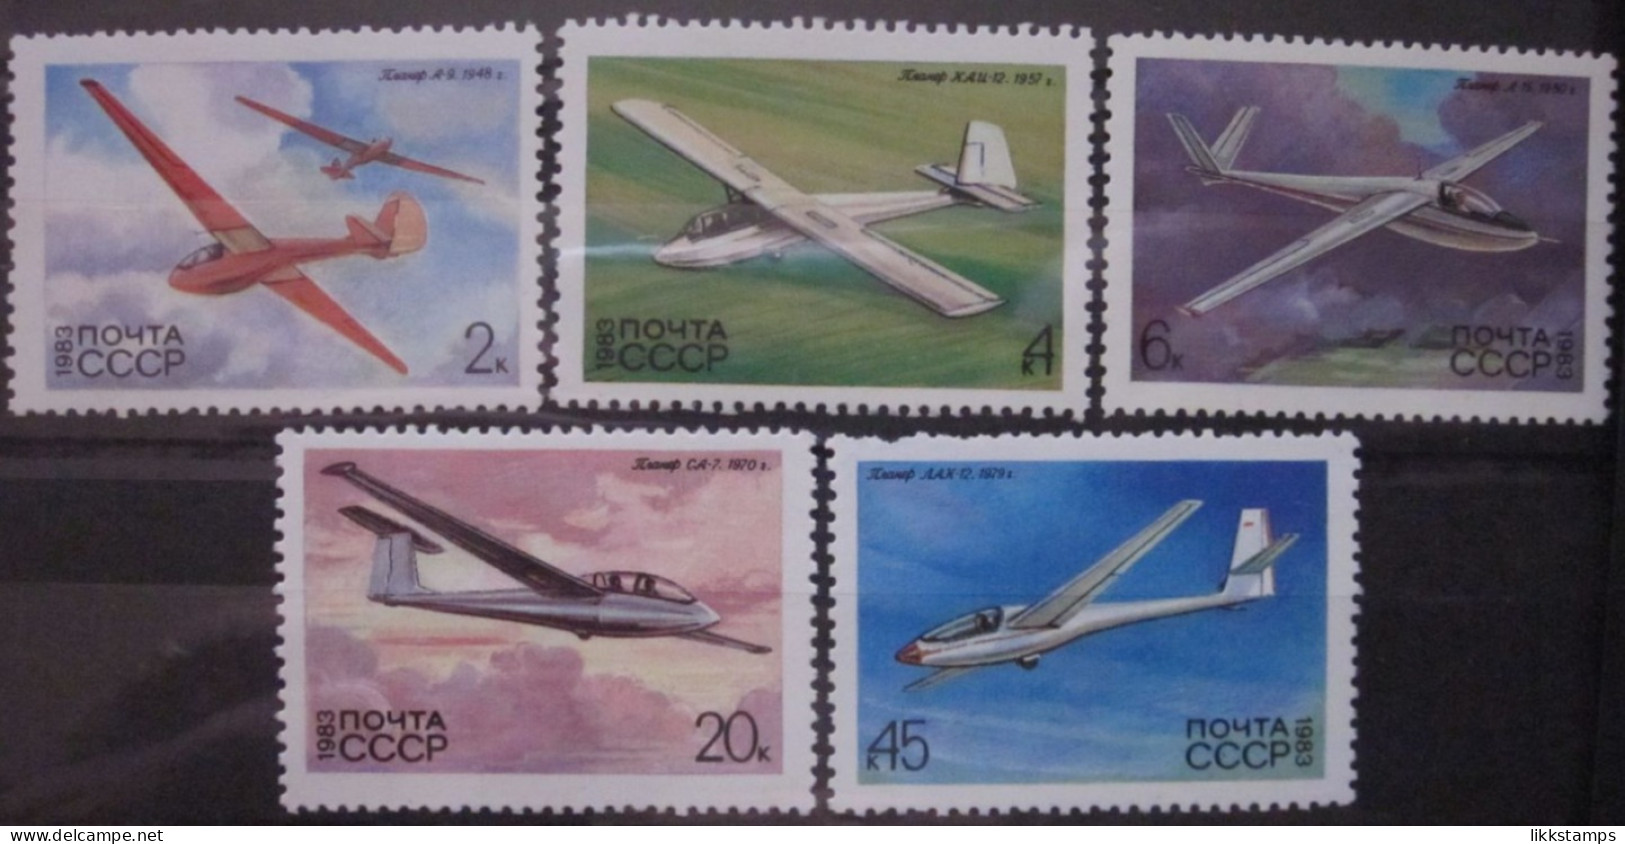 RUSSIA ~ 1983 ~ S.G. NUMBERS 5301 - 5305, ~ GLIDERS. ~ MNH #03633 - Neufs